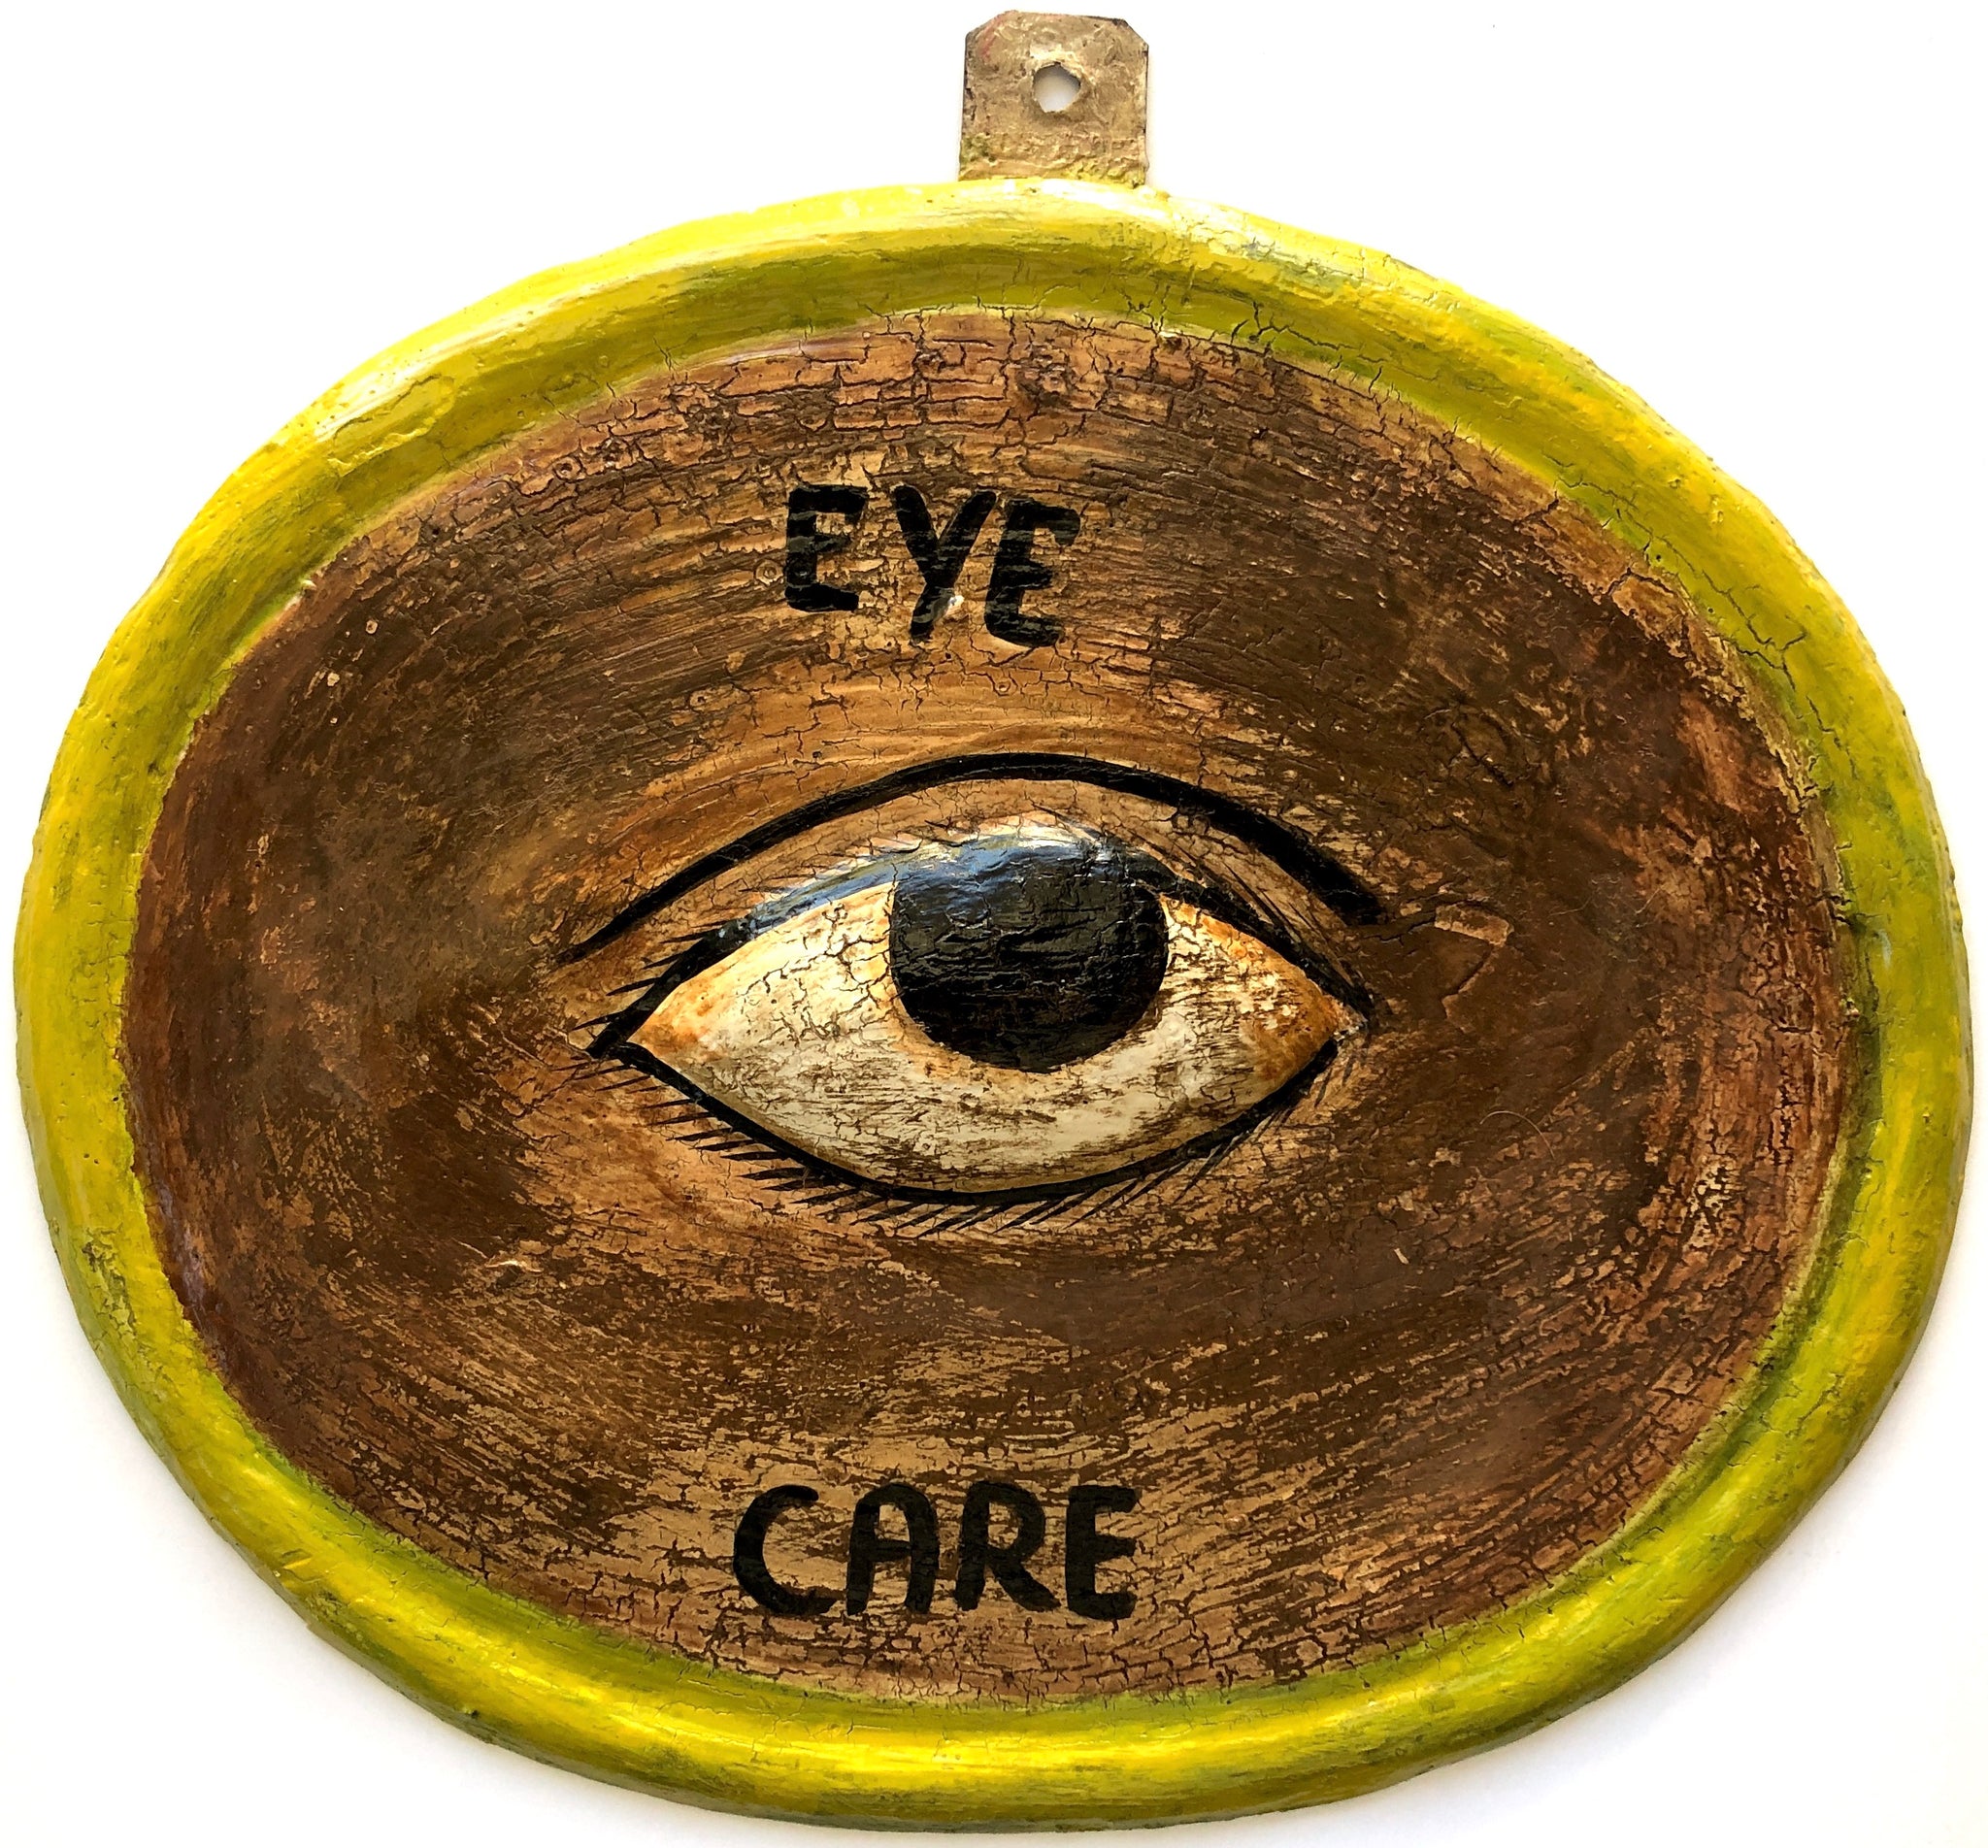 EYE CARE vintage 1970s India optician trade sign